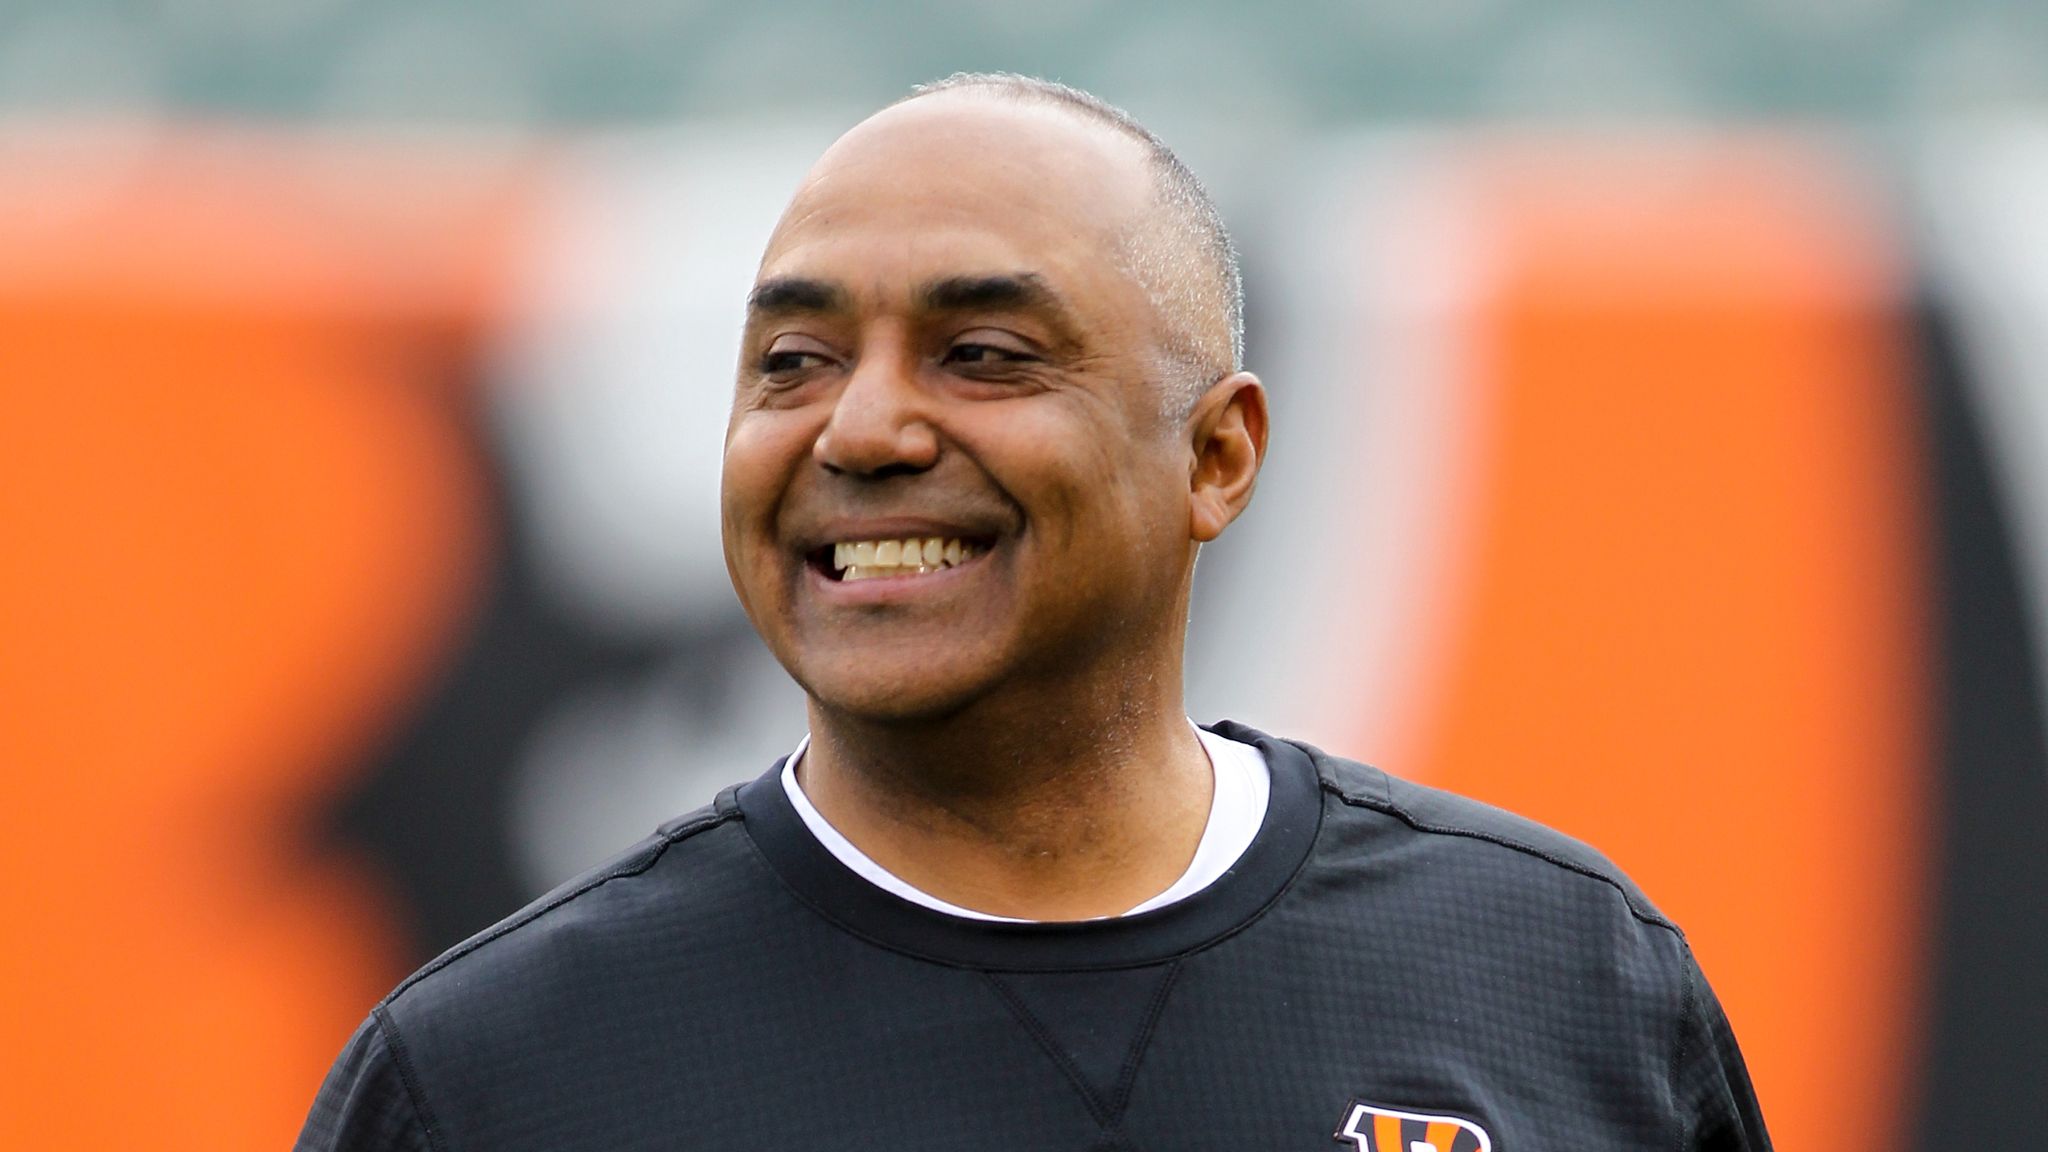 17 Captivating Facts About Marvin Lewis - Facts.net